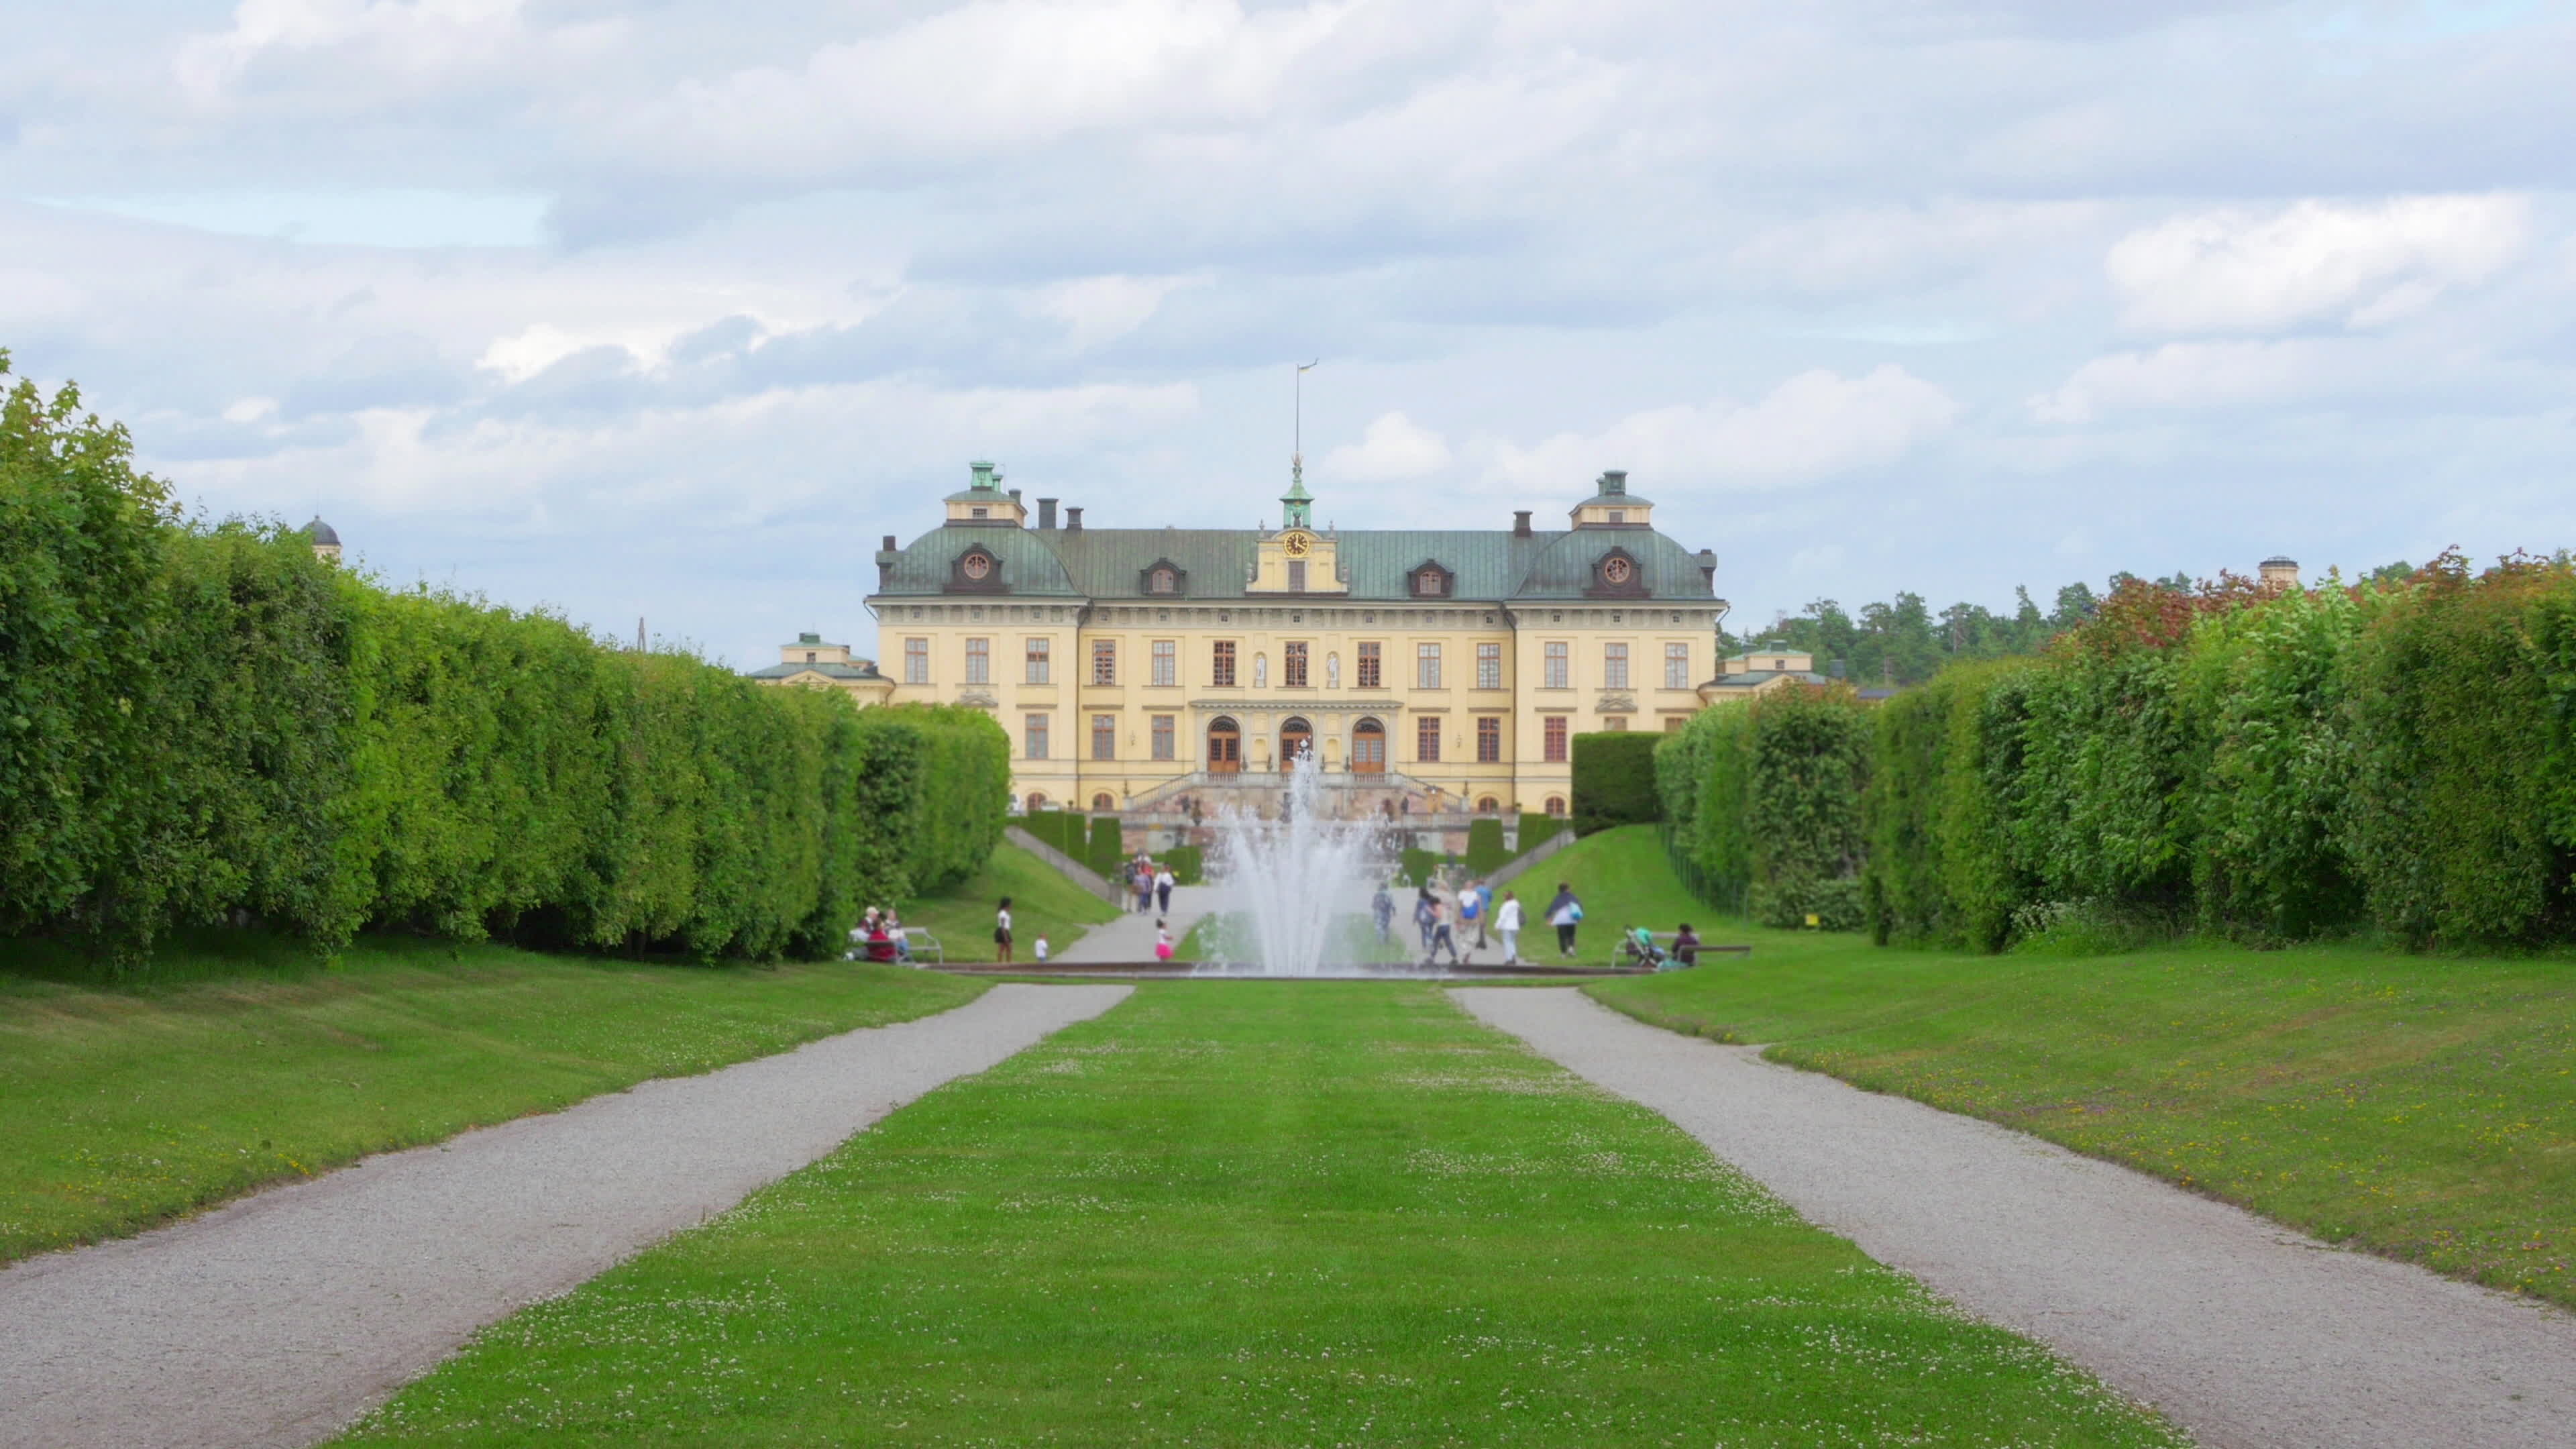 Palace: Drottningholm Palace, The private residence of the Swedish royal family. 3840x2160 4K Background.